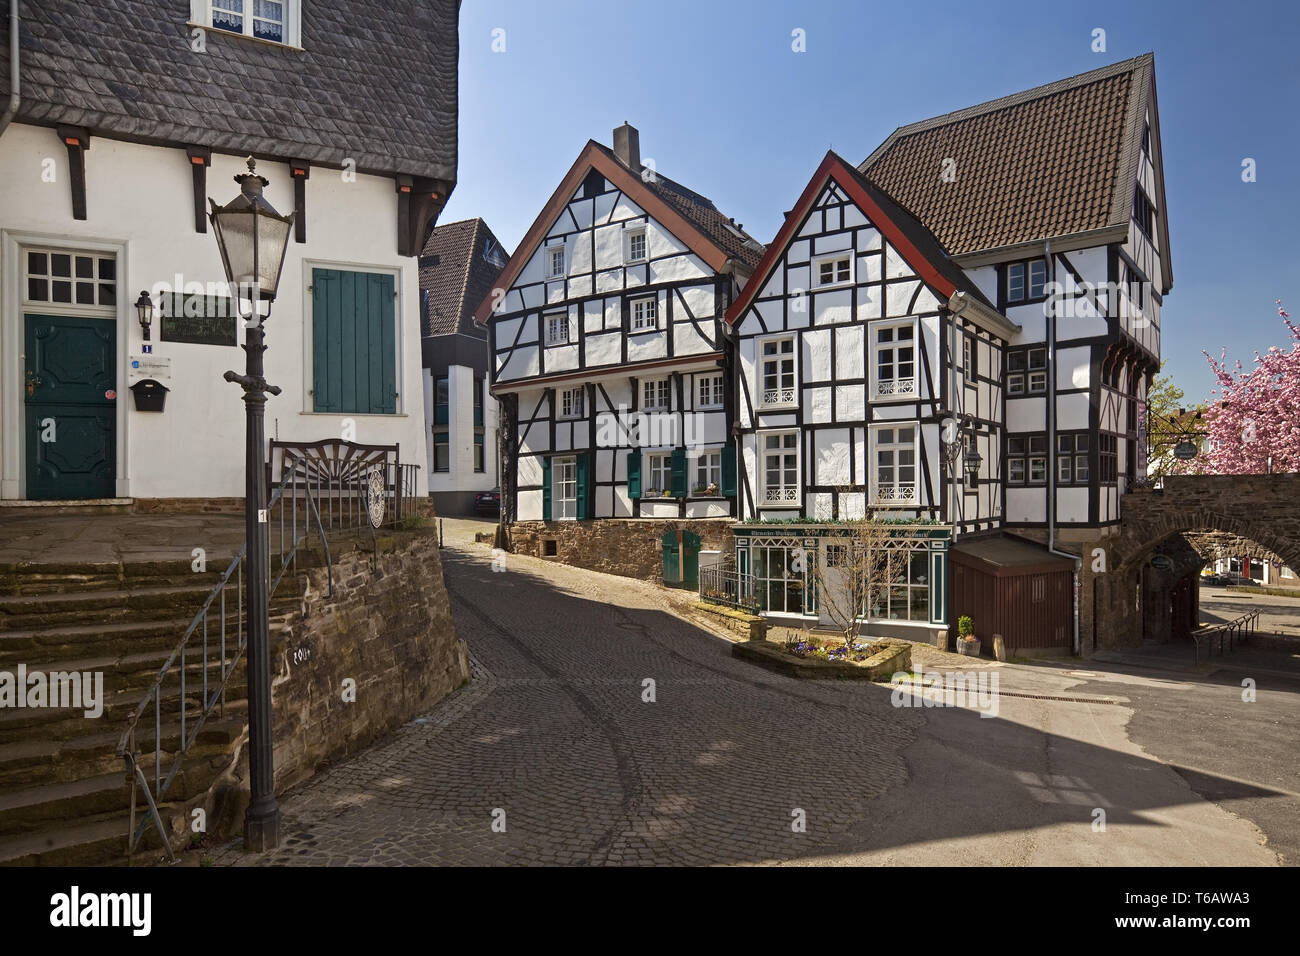 Old Timber Framed Houses High Resolution Stock Photography and Images -  Alamy